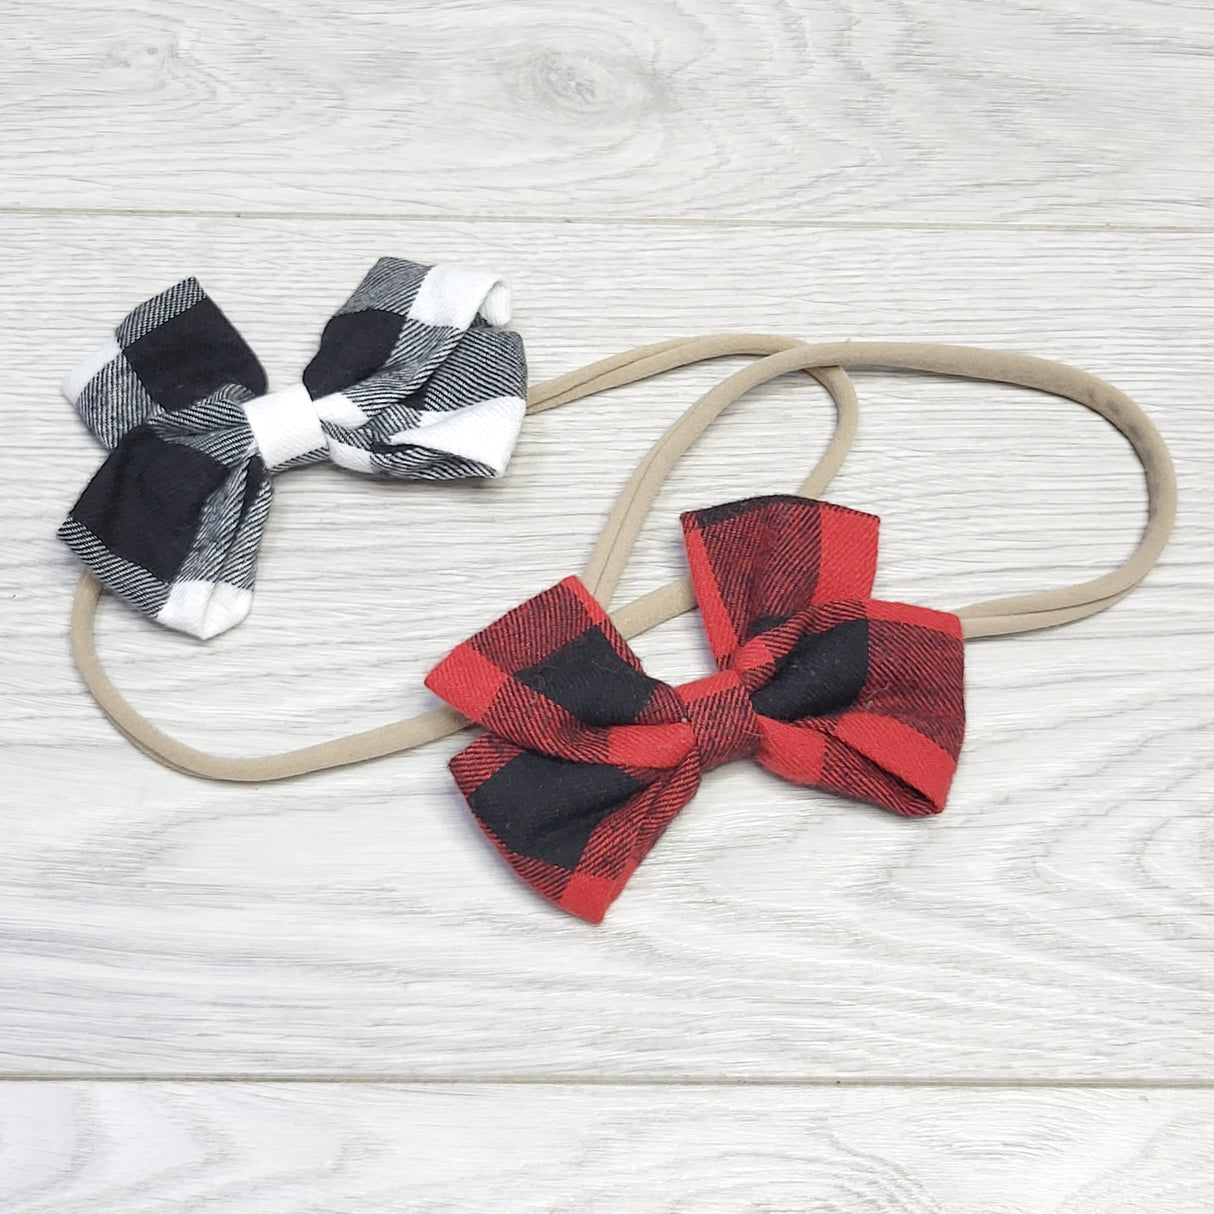 MSNDS11 - Headbands with plaid bows